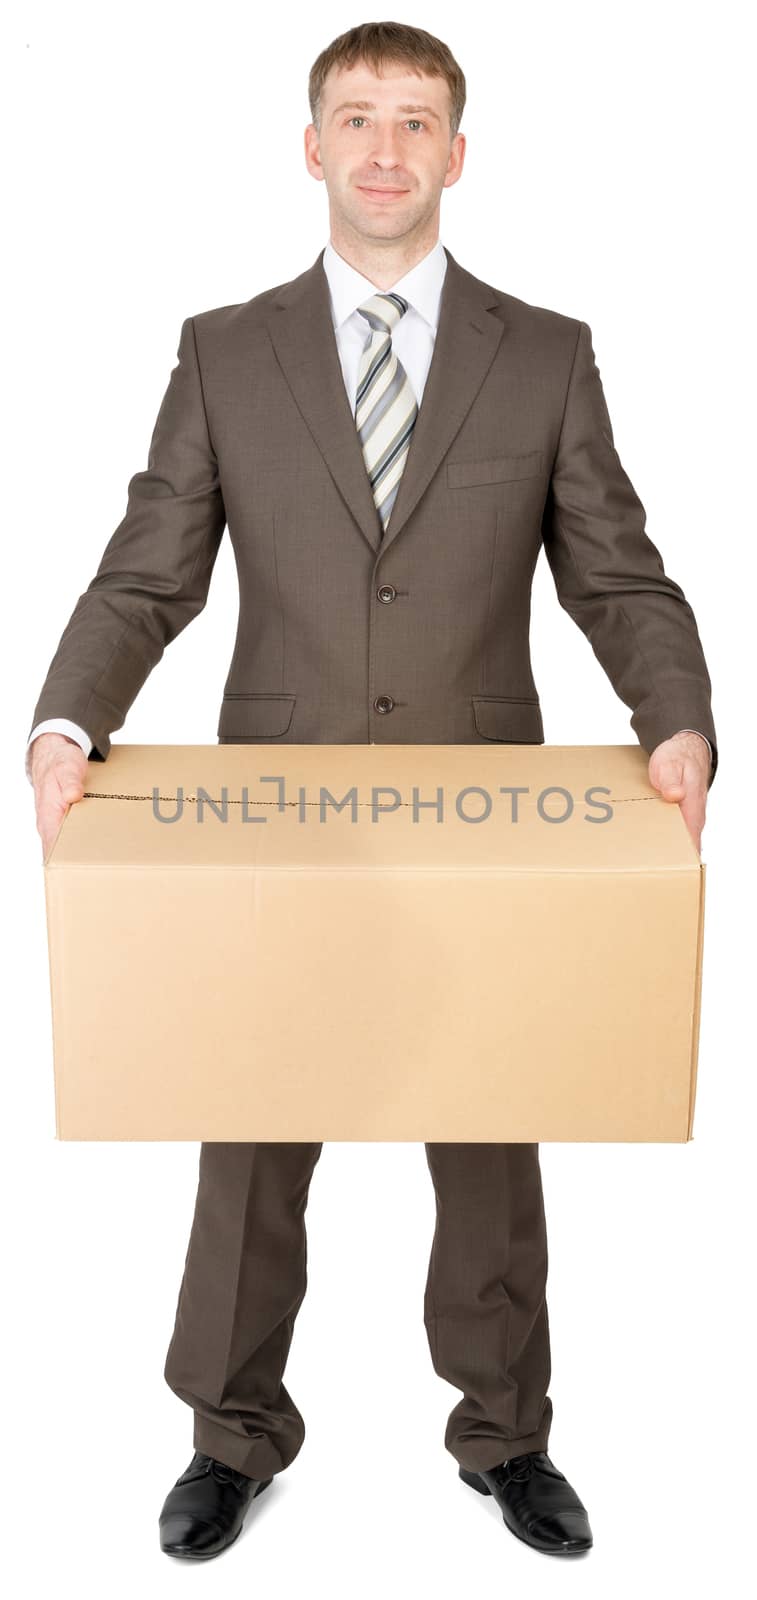 Manager in suit holding parcel box, isolated on white background